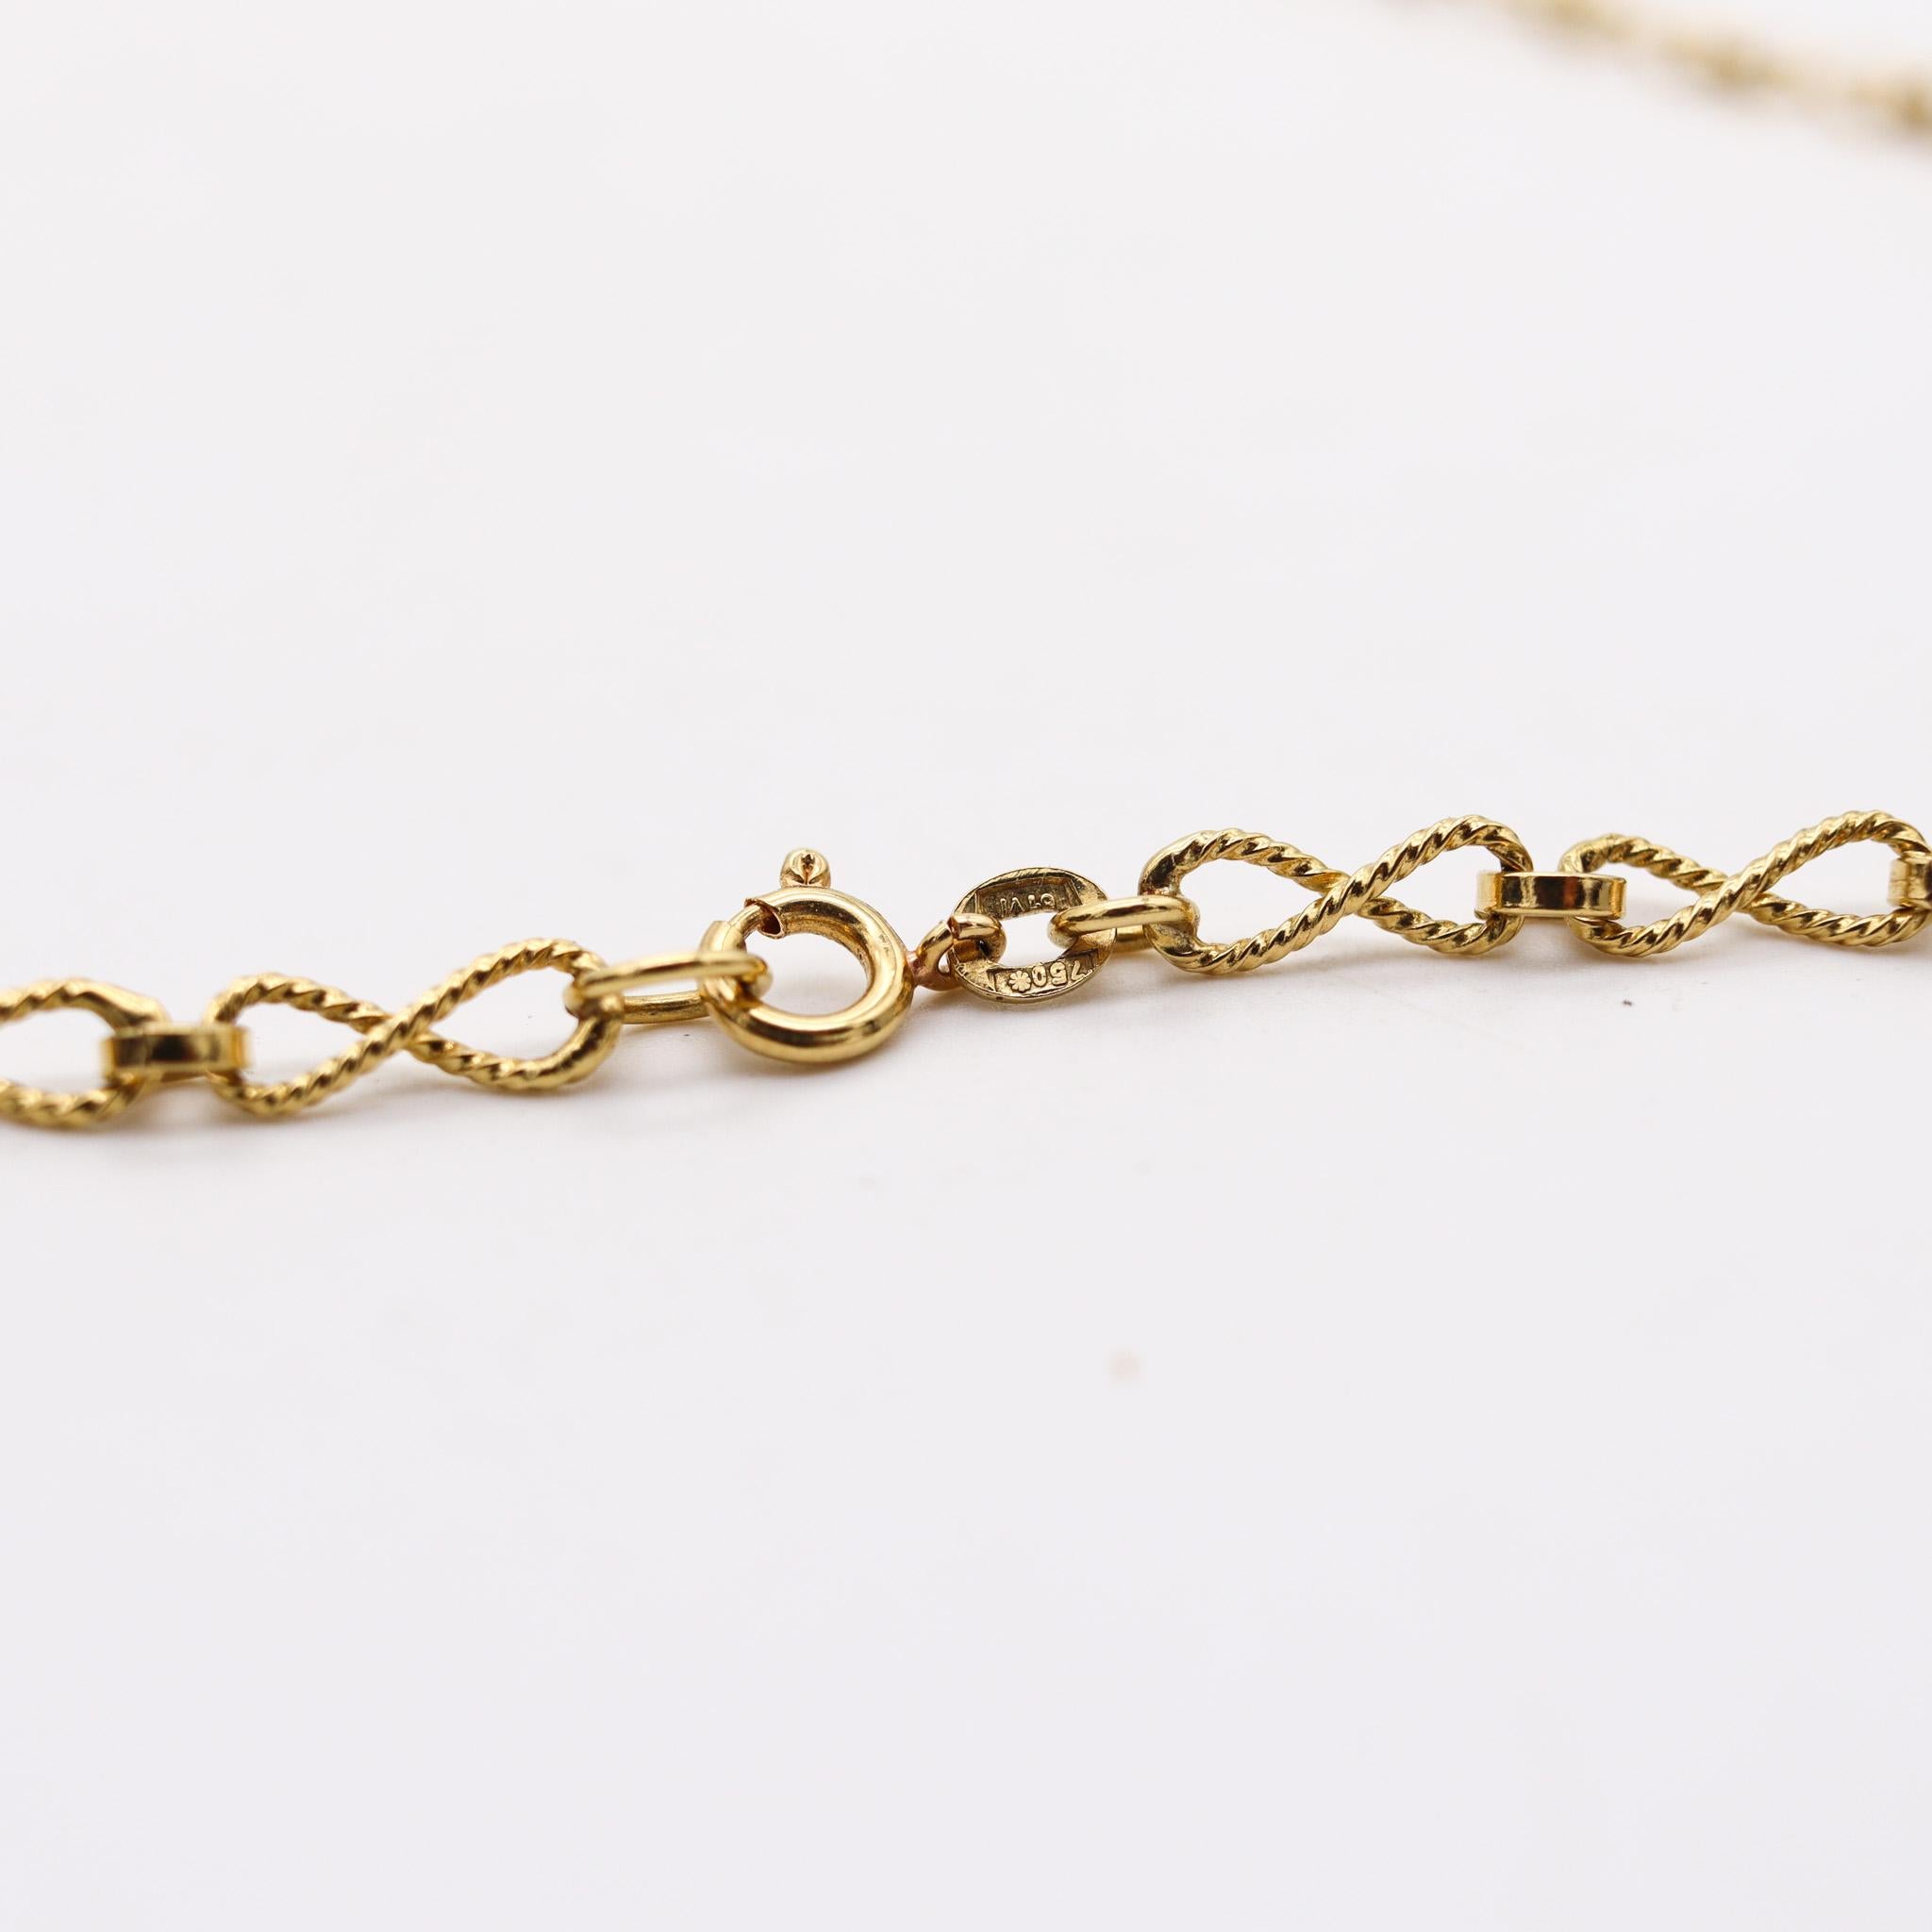 Alessi Domenico 1970 Retro Modern Twisted Long Chain In Solid 18Kt Yellow Gold For Sale 1